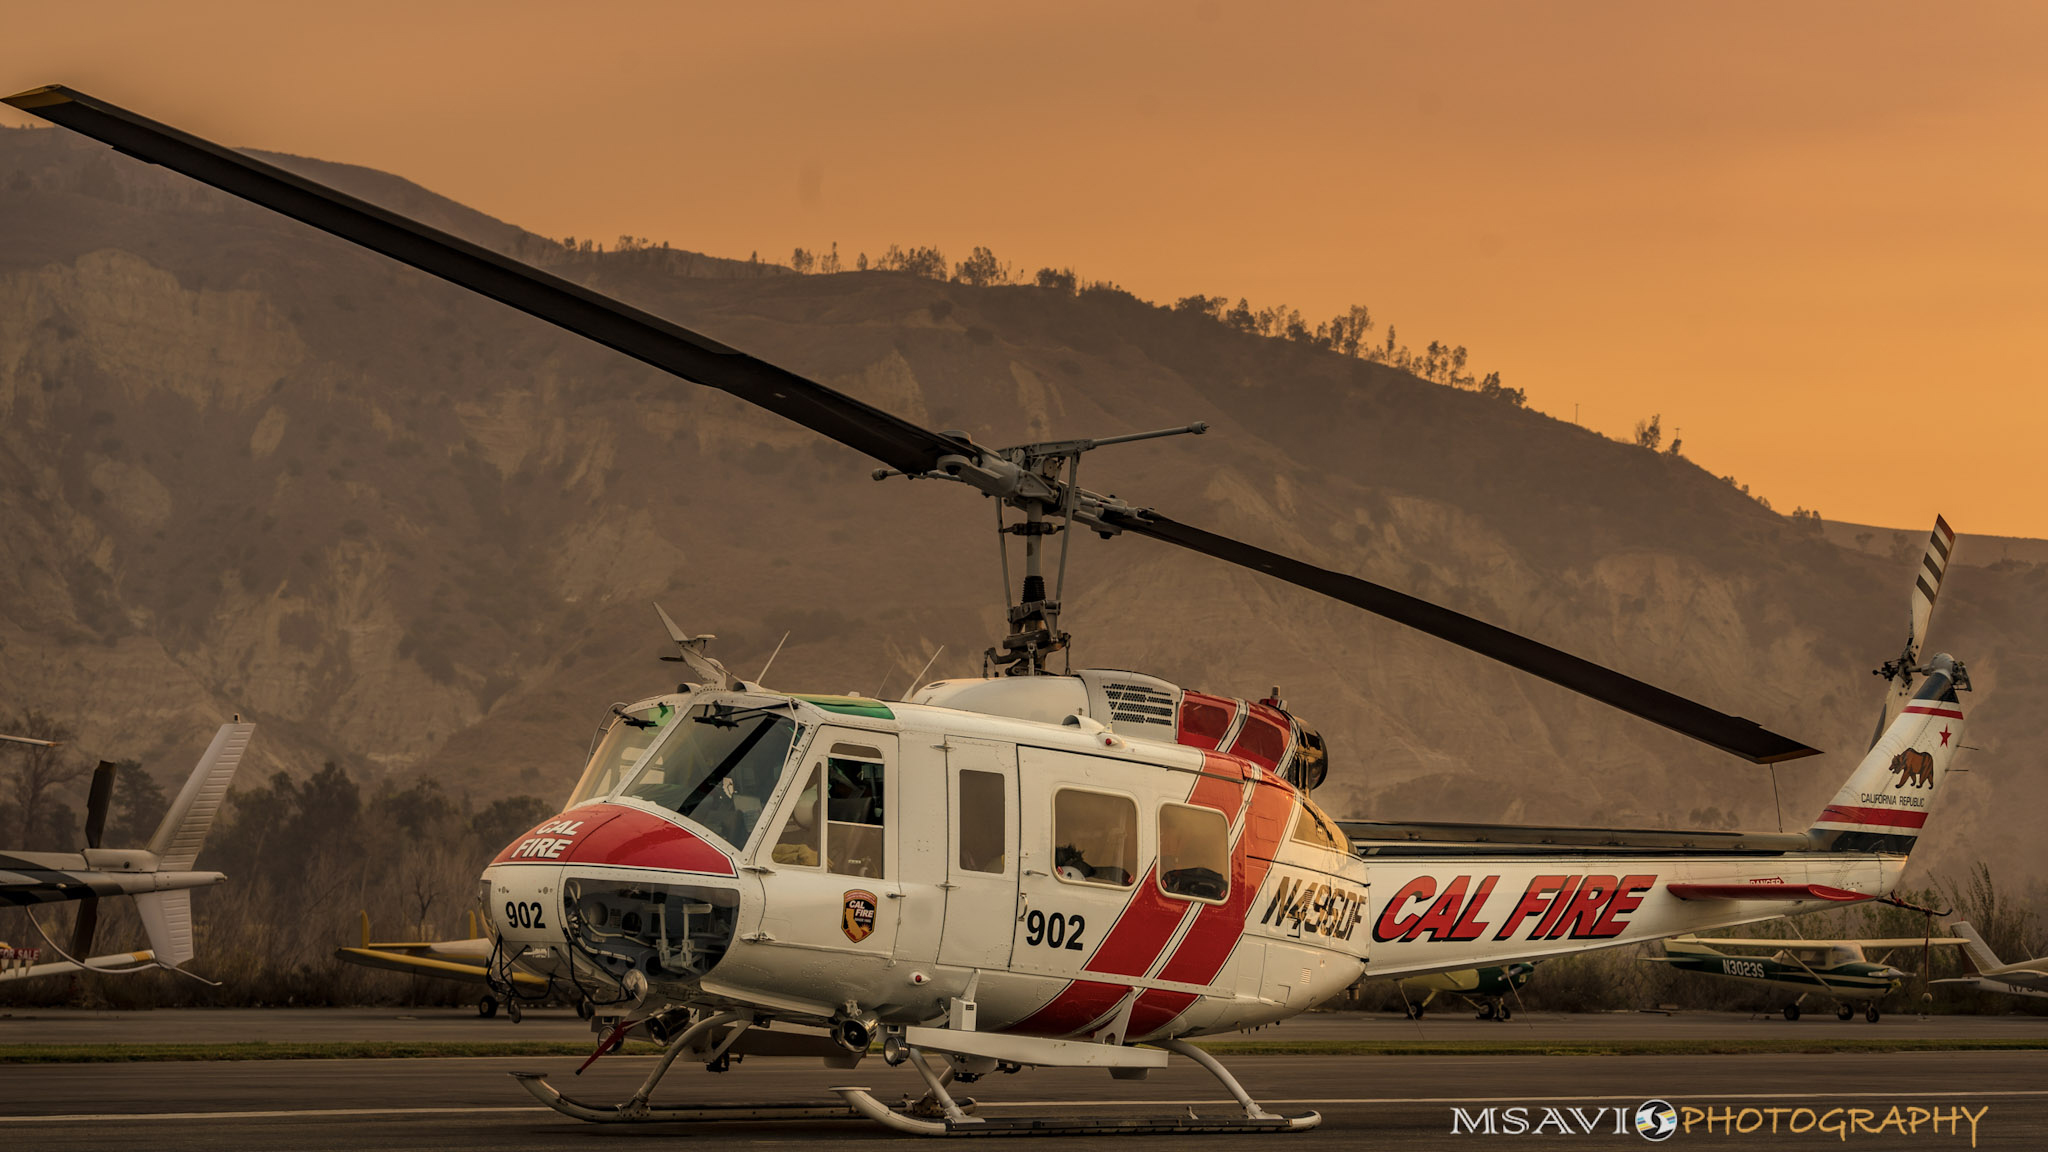 Smoke descends near a Cal Fire helicopter during firefighting operations based at California's Santa Paula Airport. Photo by Mike Salas, MSAVI Photography and Focal Flight.